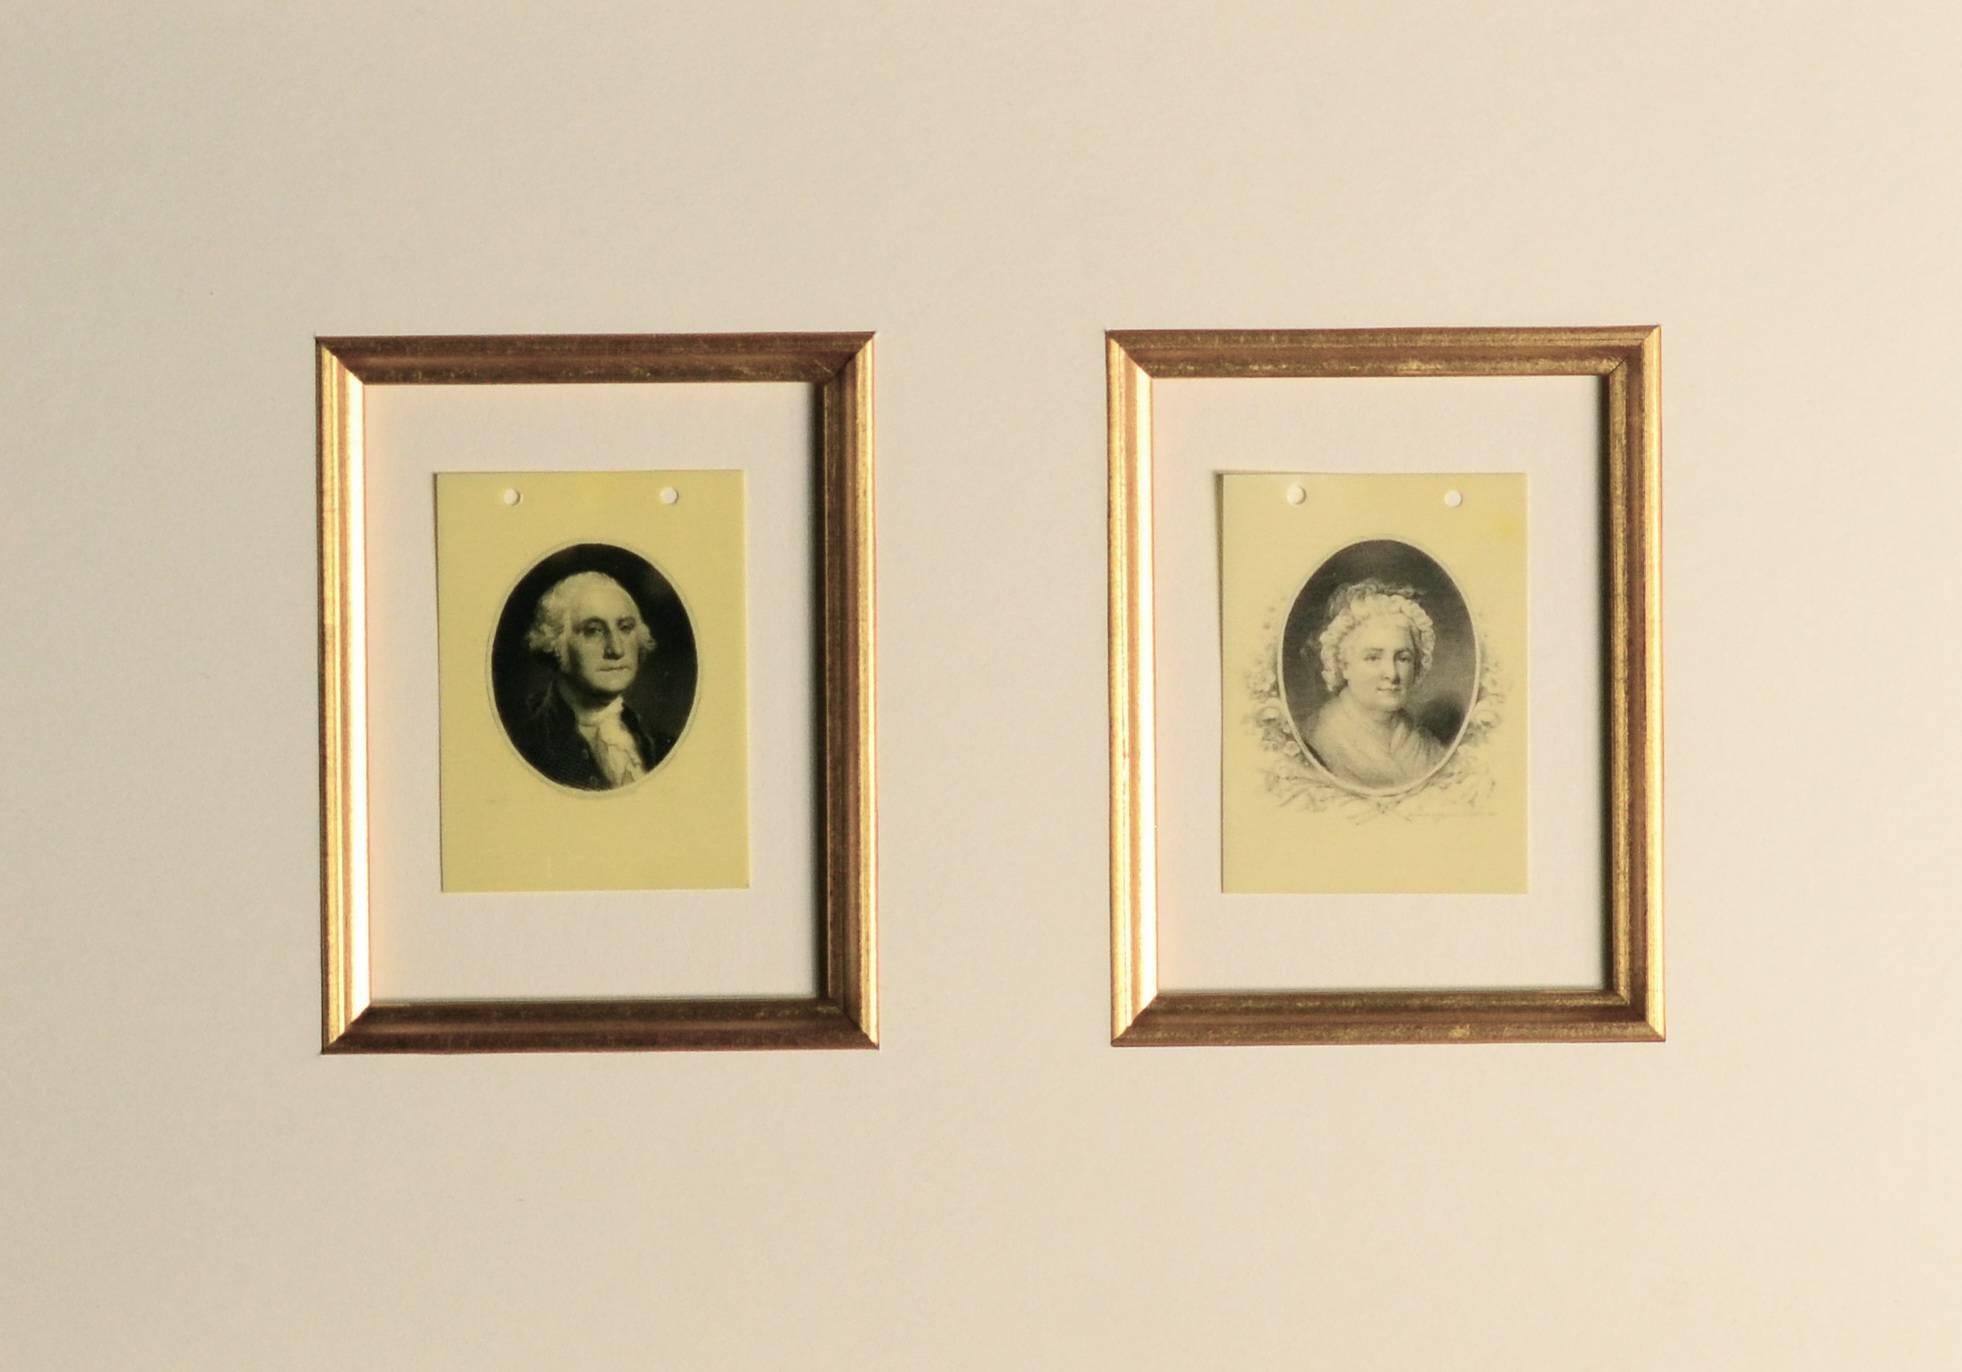 Antique George Washington & Martha Washington Cellulite Images, circa 1899 to celebrate the 110th anniversary of his death. Very fine detail and excellent condition.
each image is 1 1/2"x 3" Frame is 13"x17"
#10272
Museum